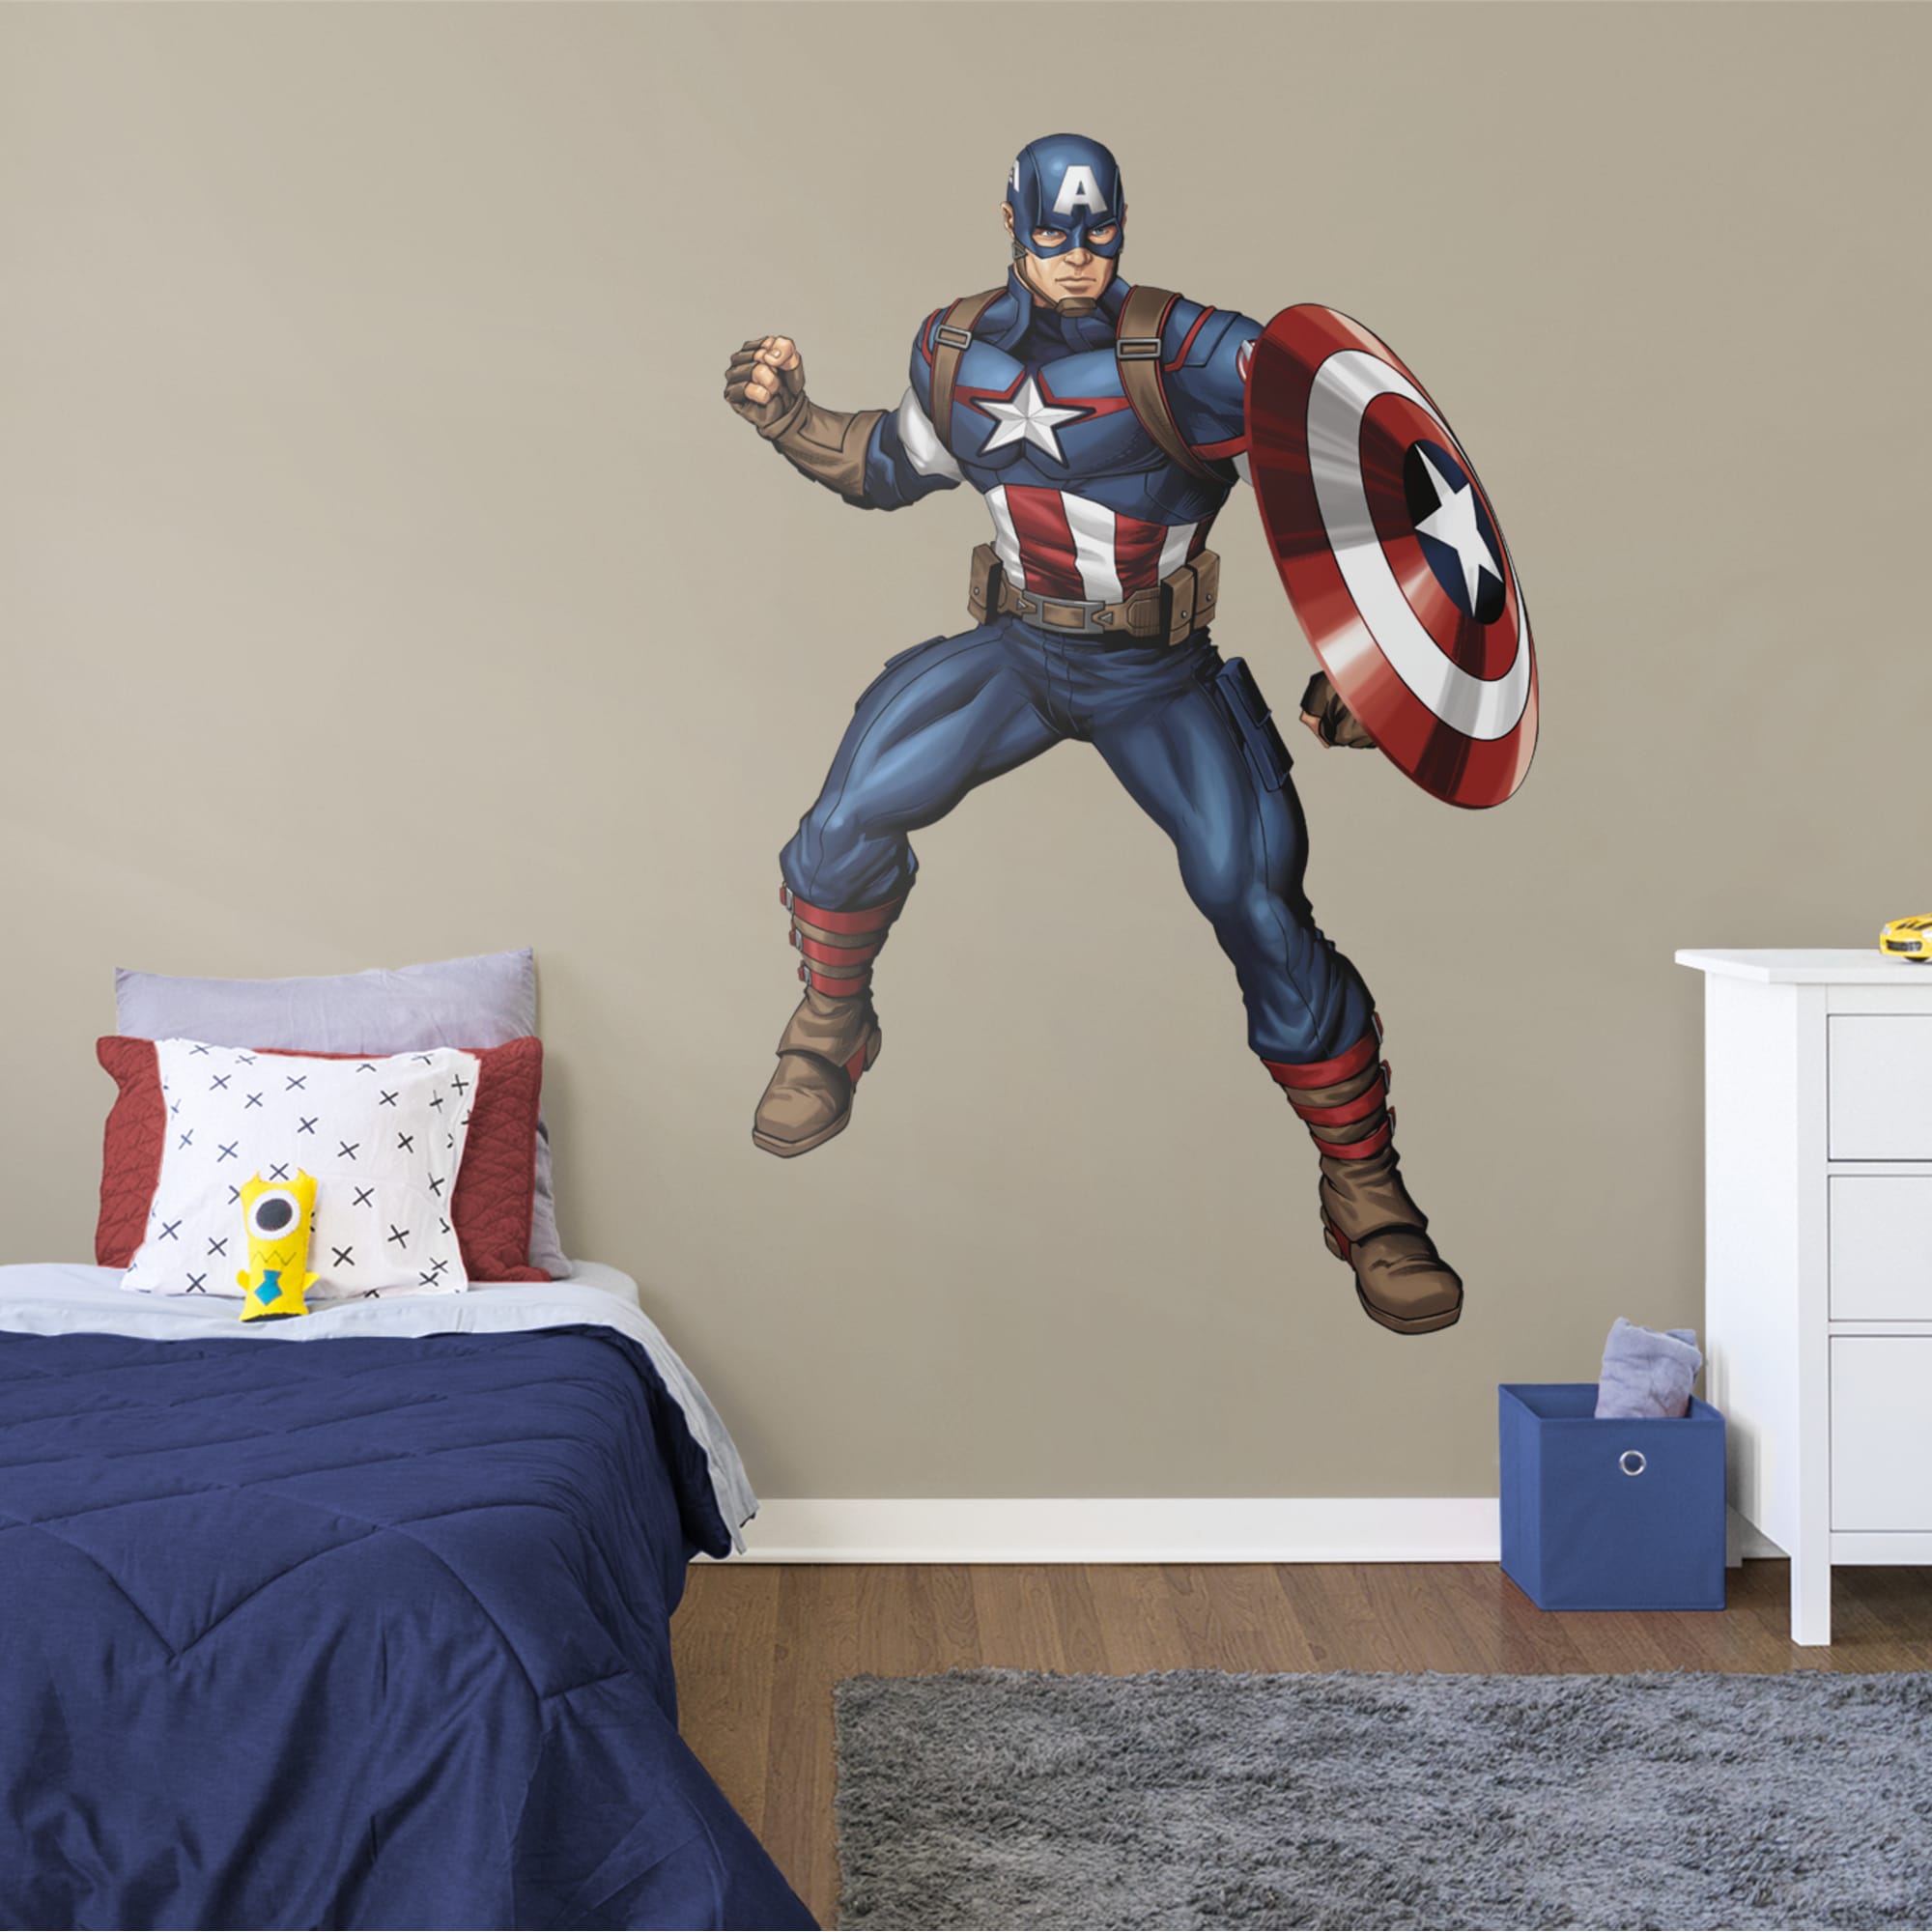 Captain America: Avengers Assemble - Officially Licensed Removable Wall Decal 51.0"W x 75.0"H by Fathead | Vinyl